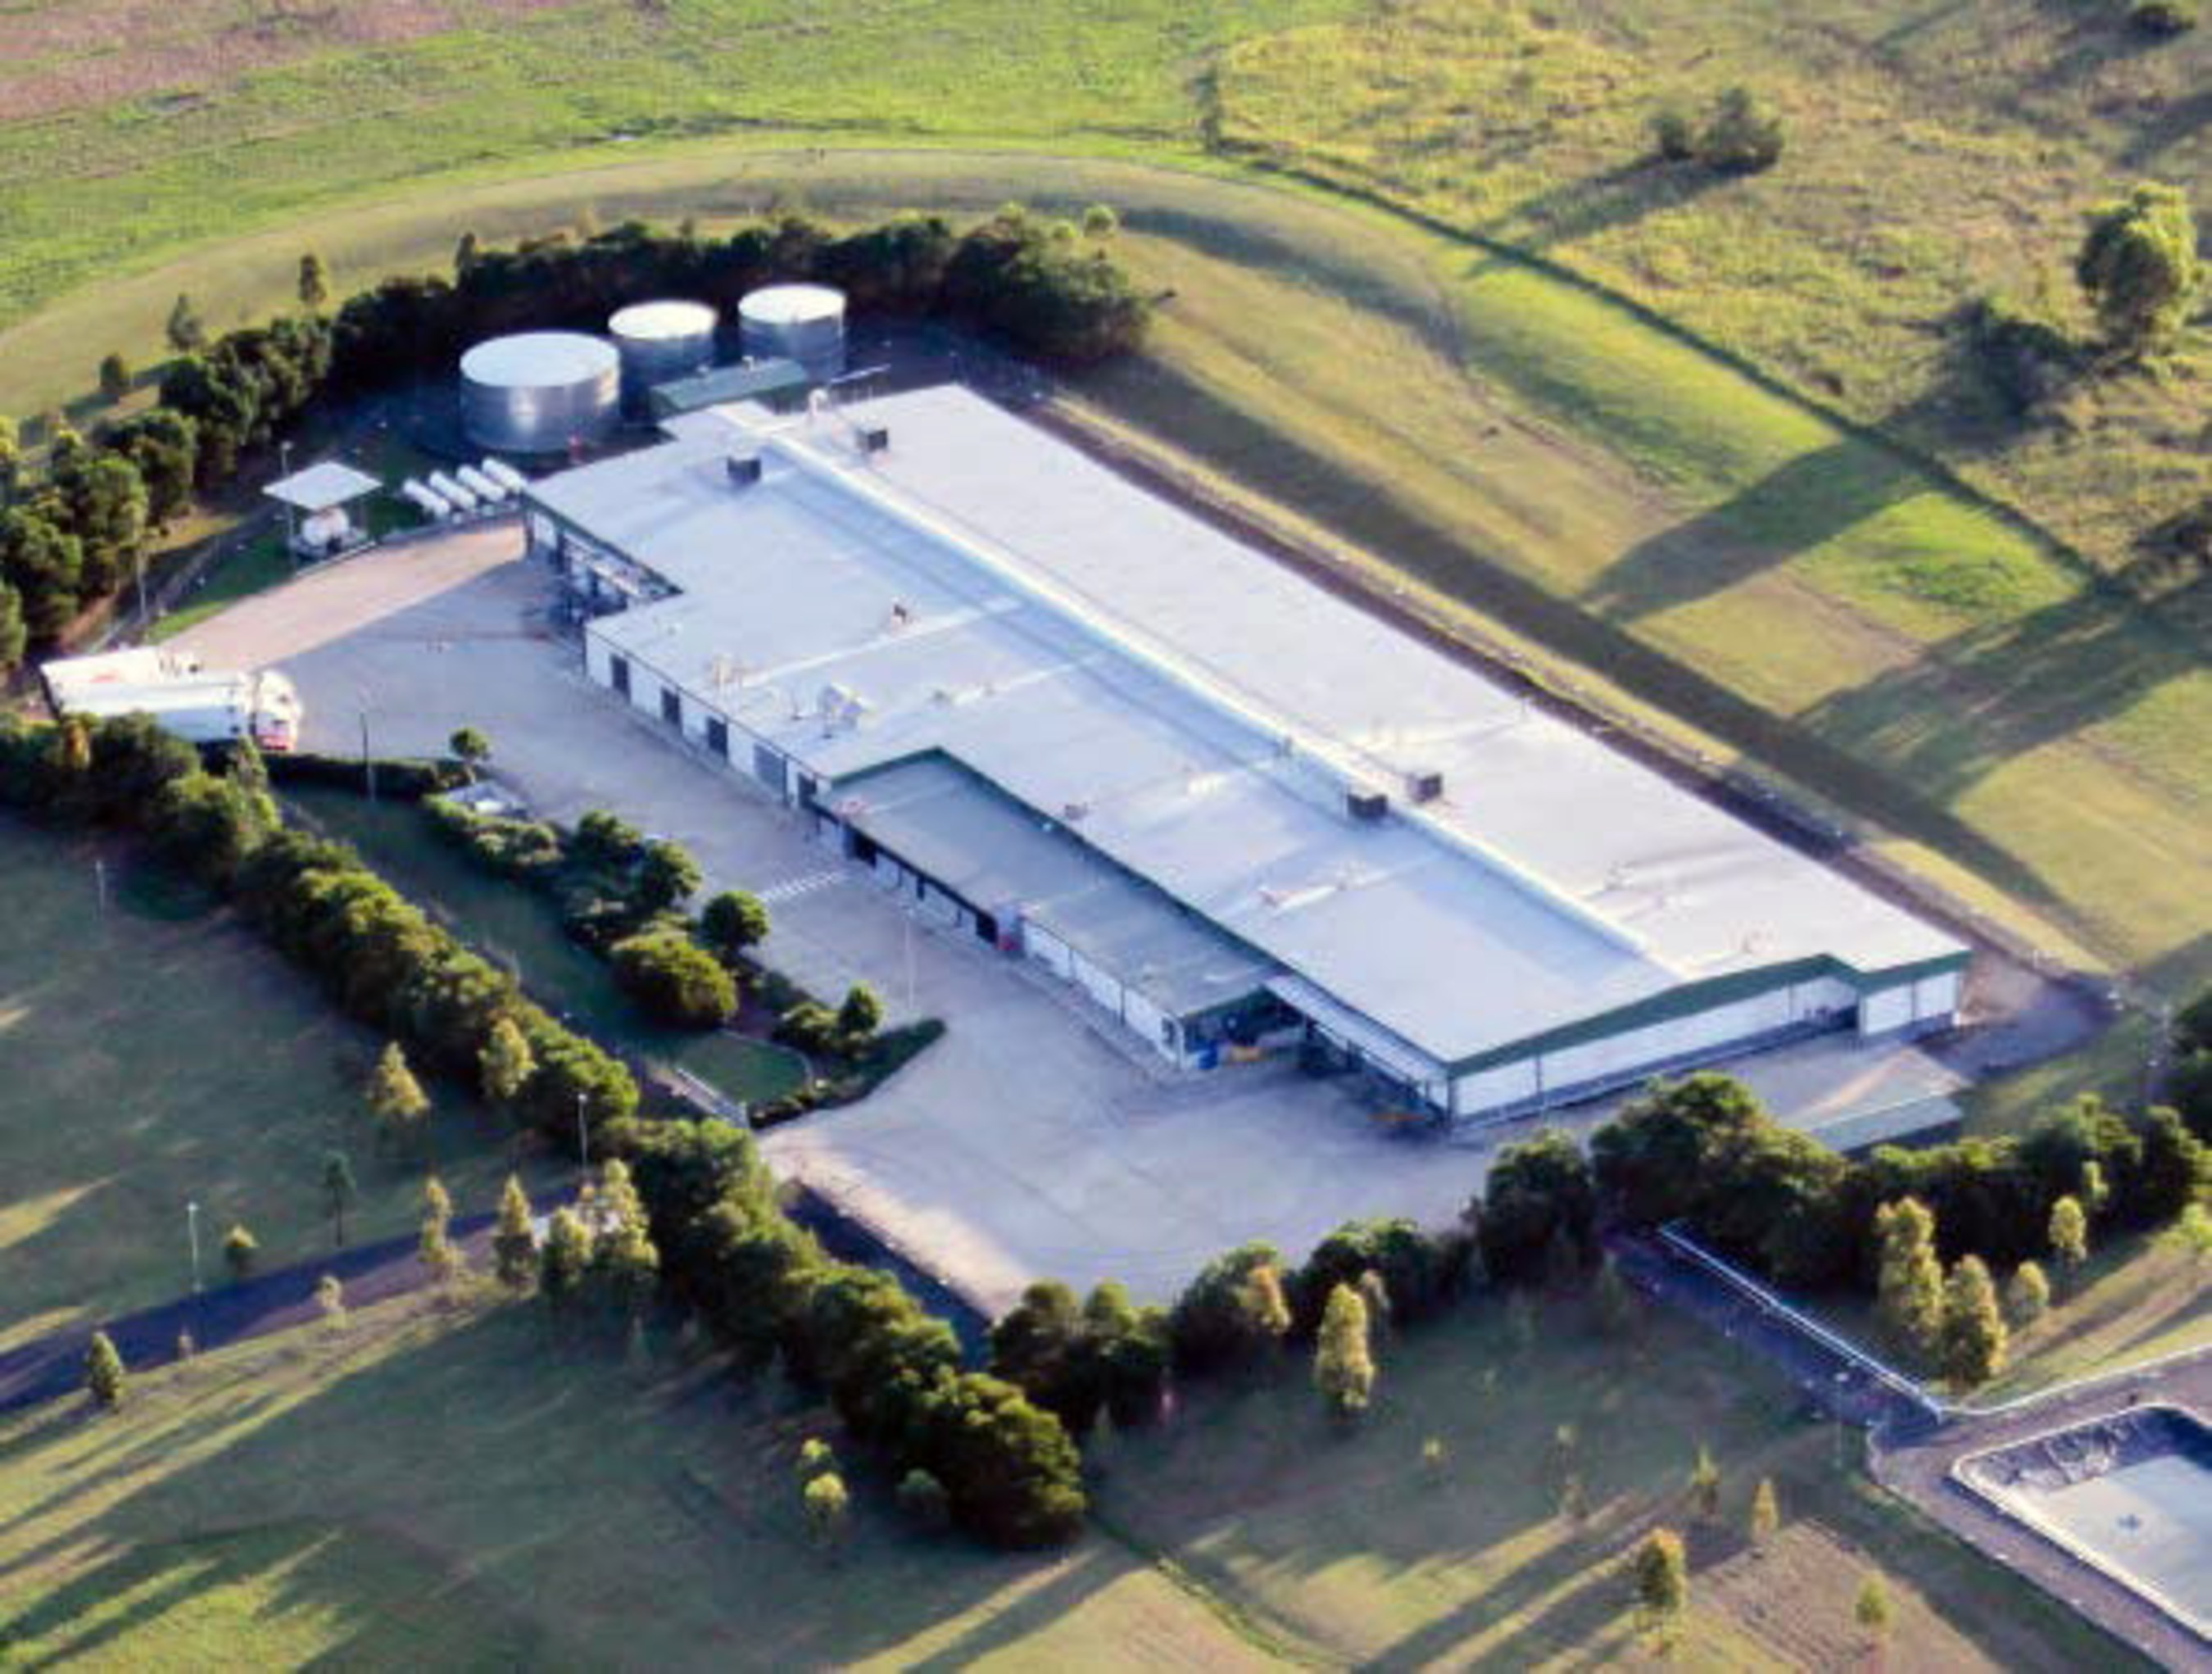 W. P. Carey Inc. completes a 20-year sale-leaseback transaction with Inghams Enterprises Pty. Limited (Inghams) in relation to a portfolio of 31 Australian industrial and agricultural properties for approximately $138 million.